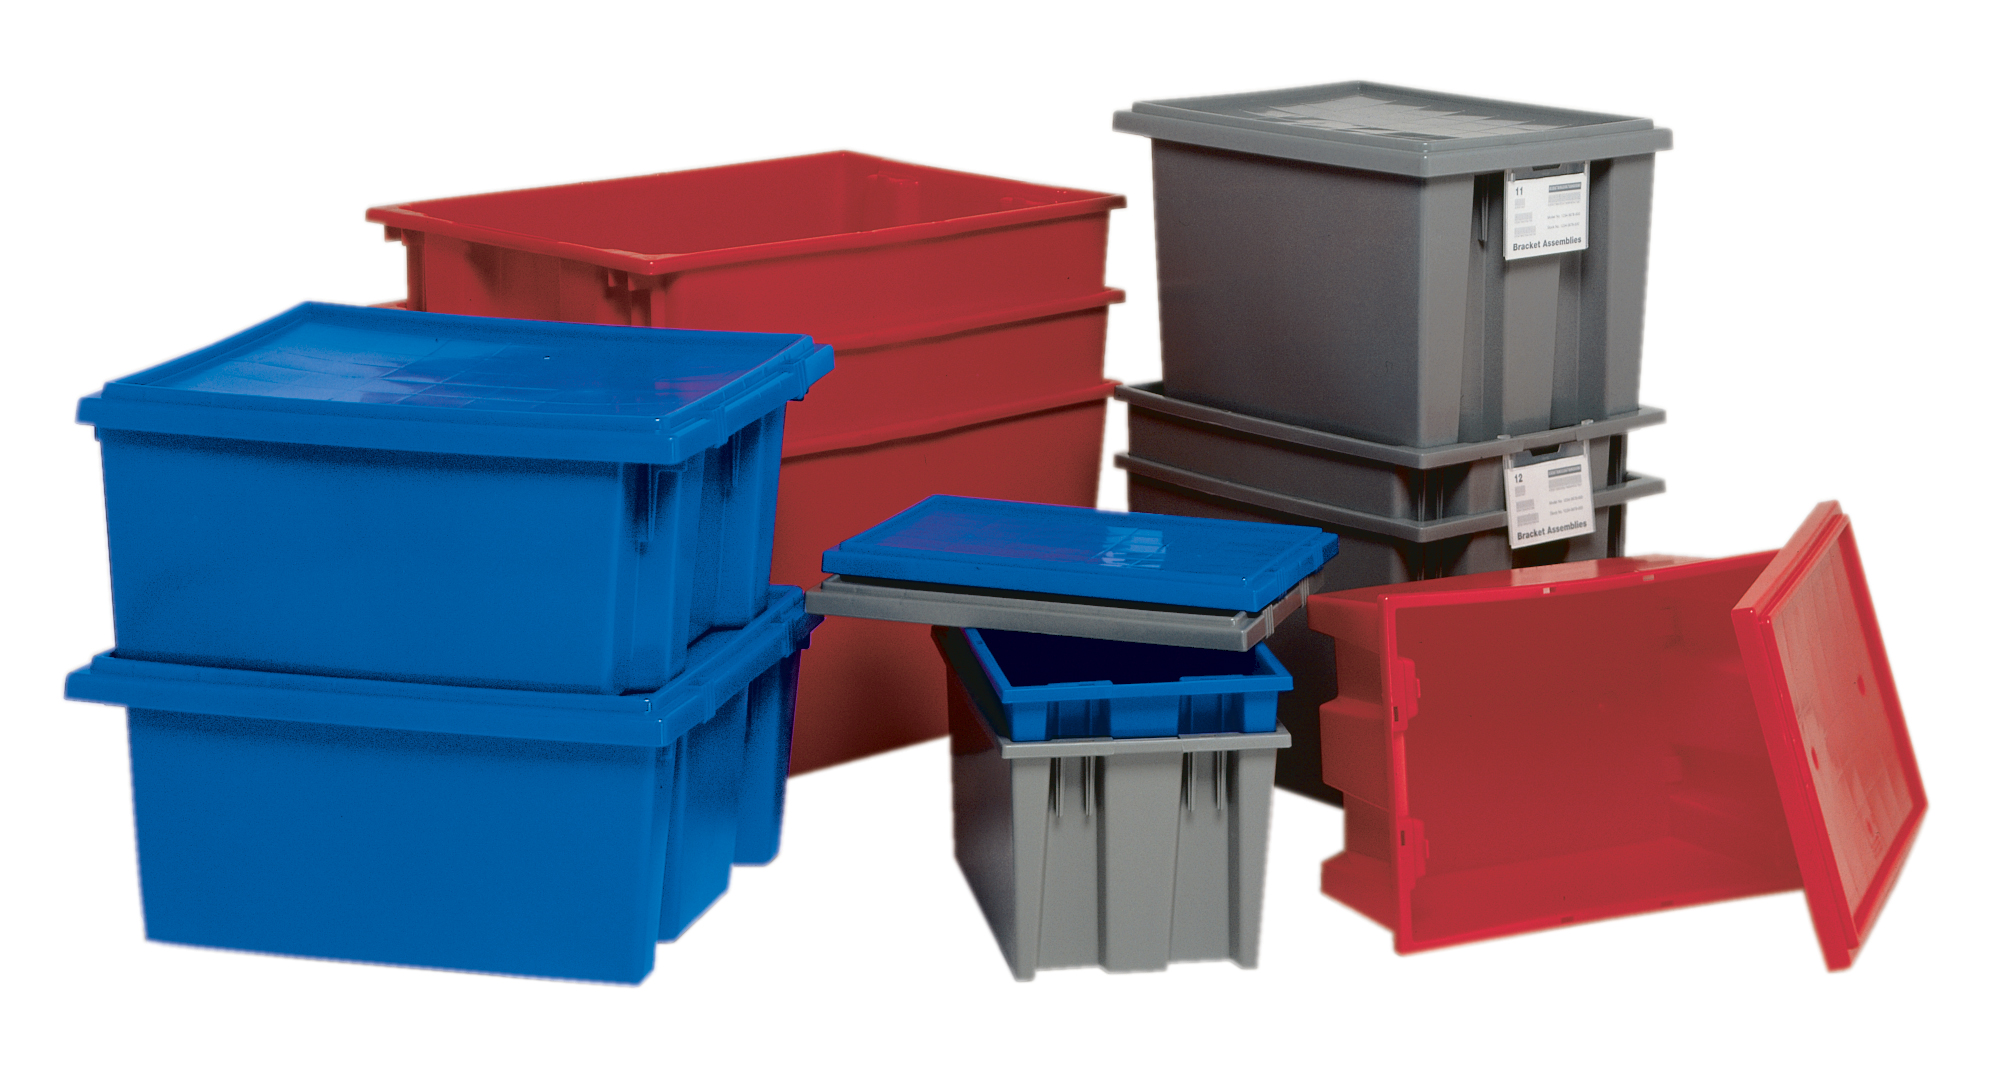 Stack and nest totes: 29-1/2"L x 19-1/2"W x 15"H